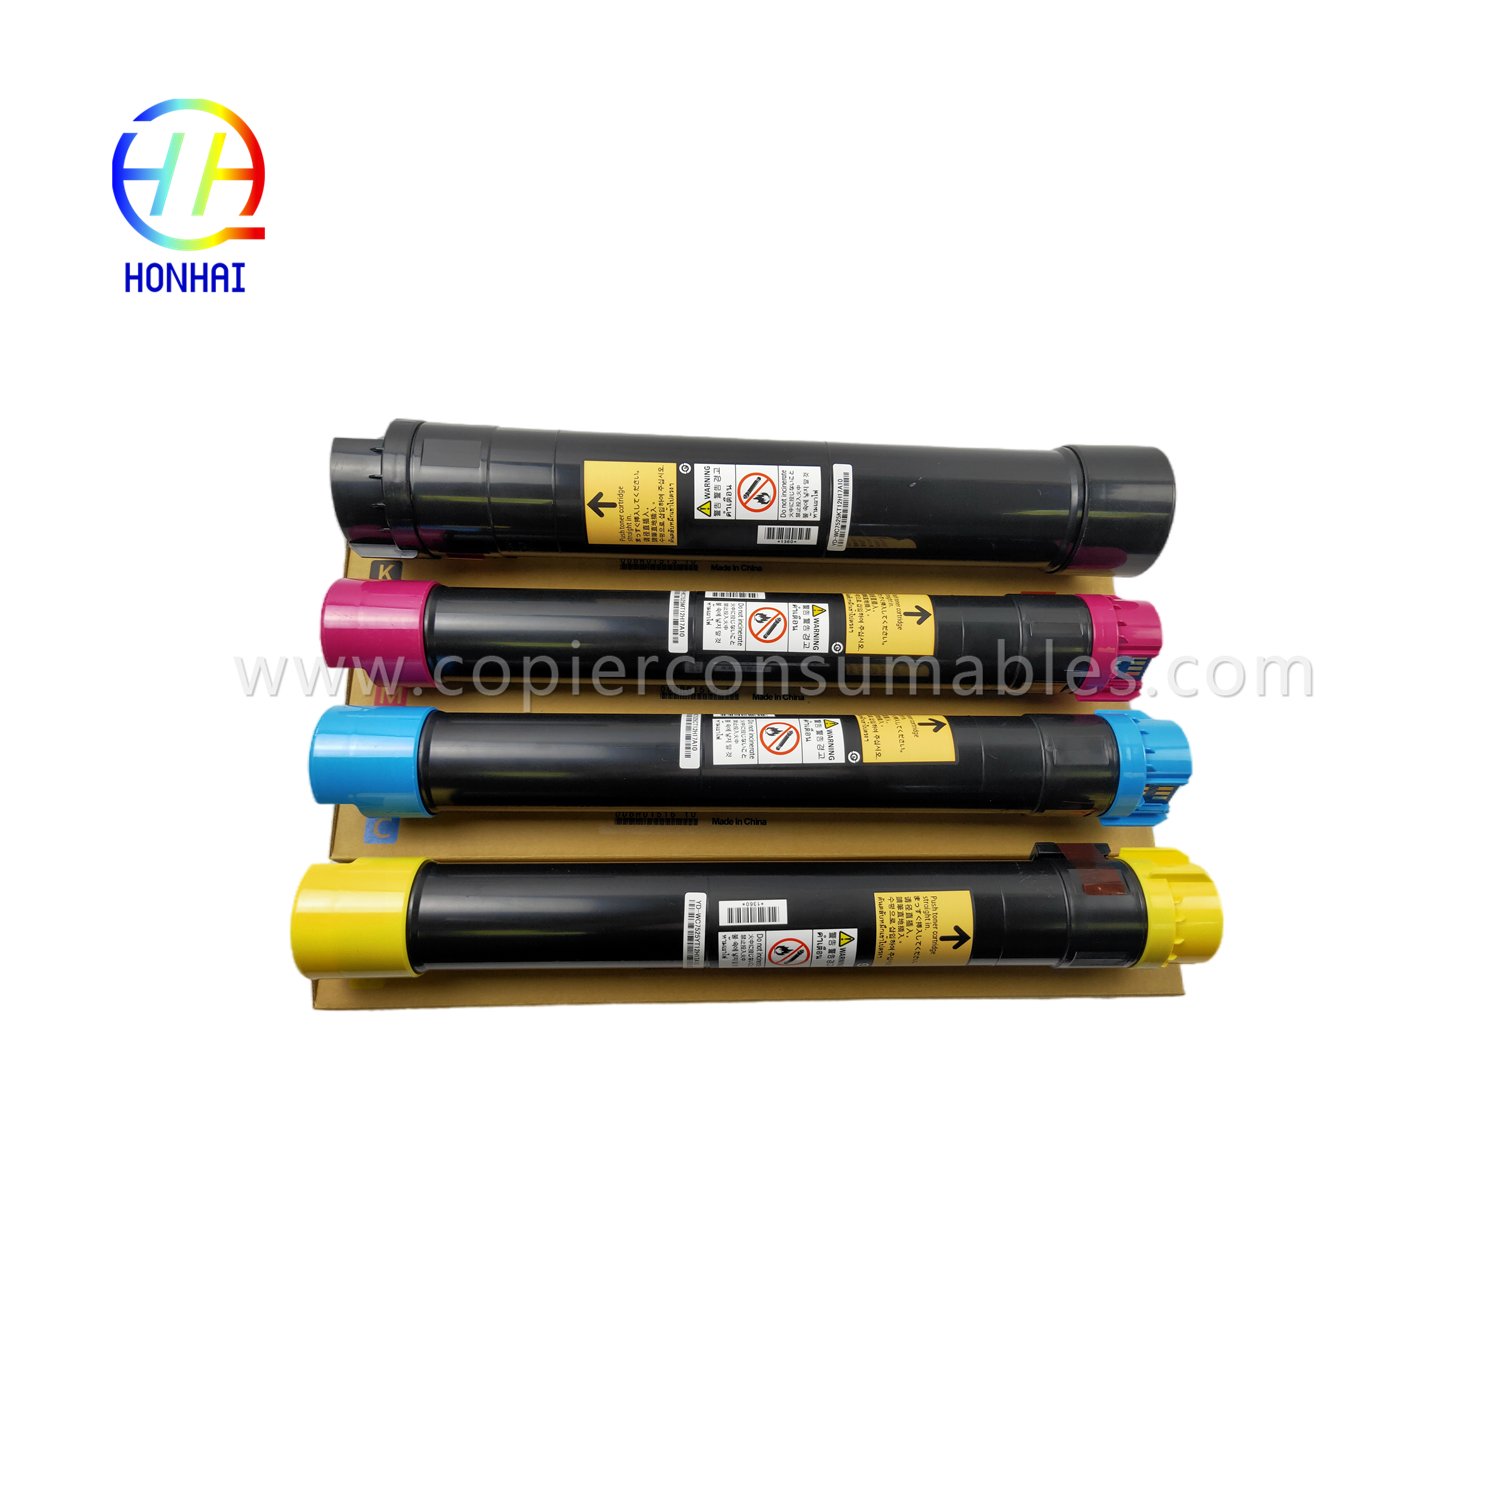 Toner Cartridge Imported Powder Set (BCMY) សម្រាប់ Xerox Workcentre 7830 7835 7845 7855 7970 7525 7530 7535 7545 7556 006R01513 006R01514 5006R